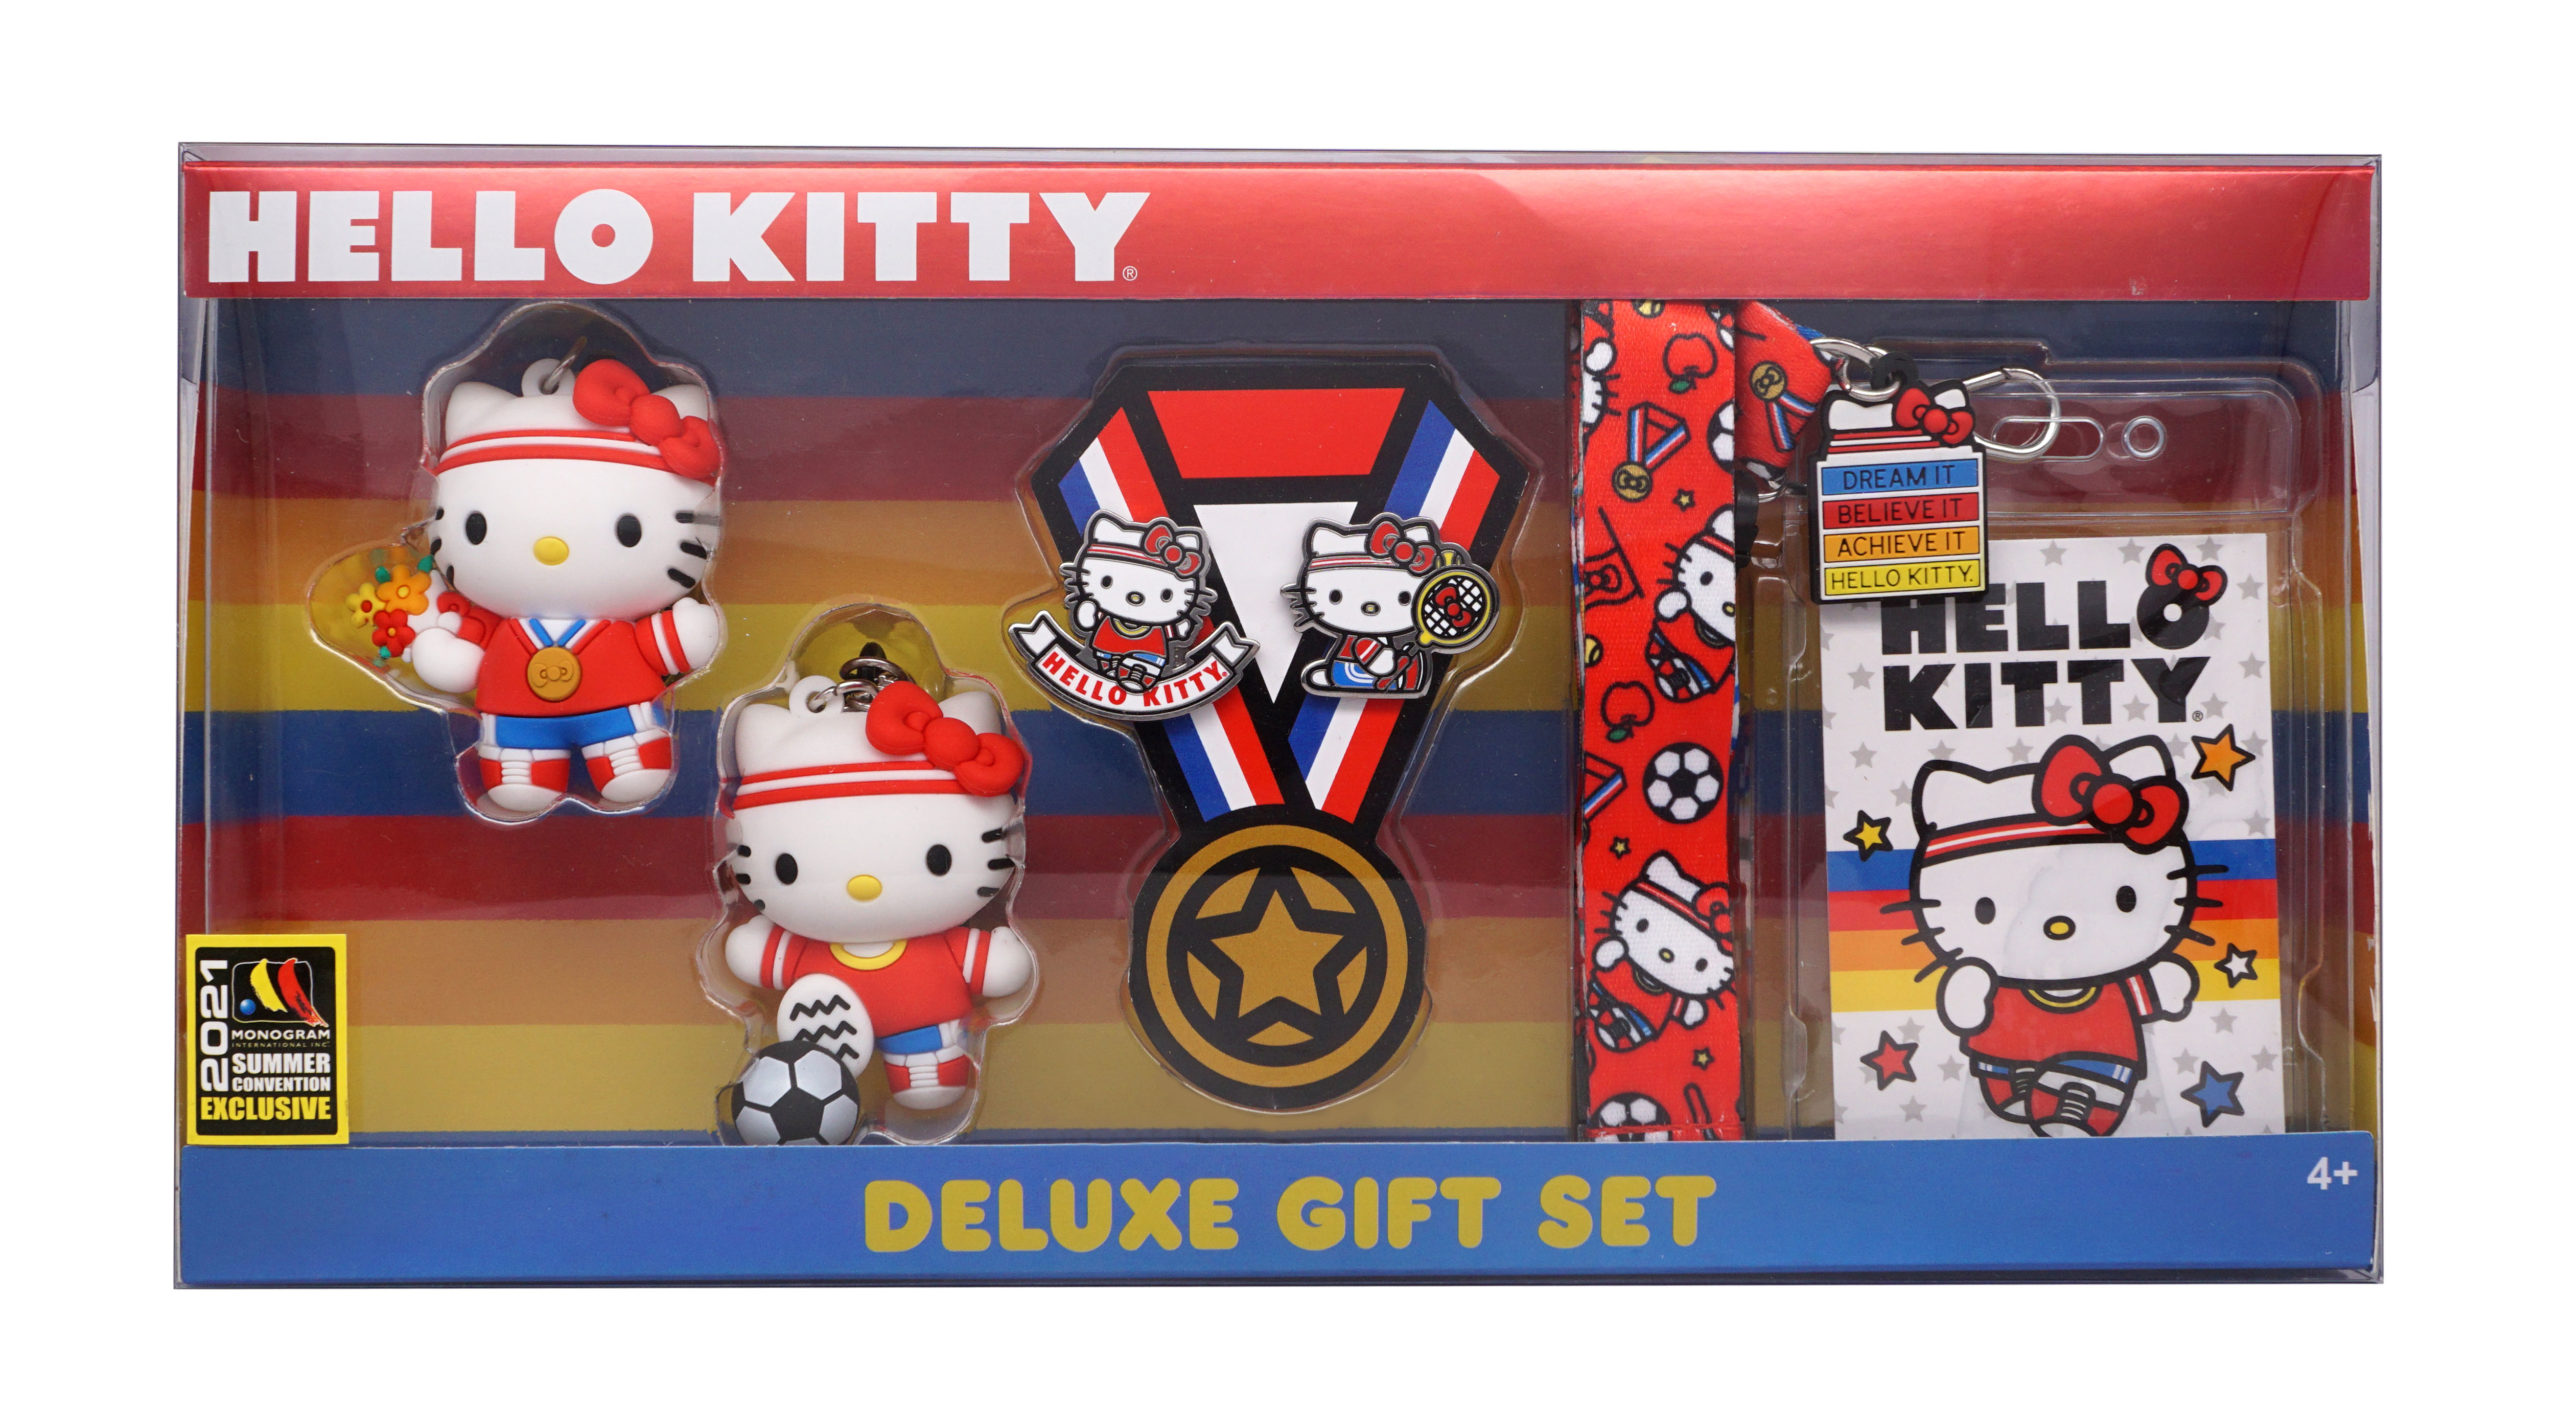 Hello Kitty Café Truck Serves Up Sweets, Merch at San Diego Comic-Con 2023  - San Diego Comic-Con Unofficial Blog